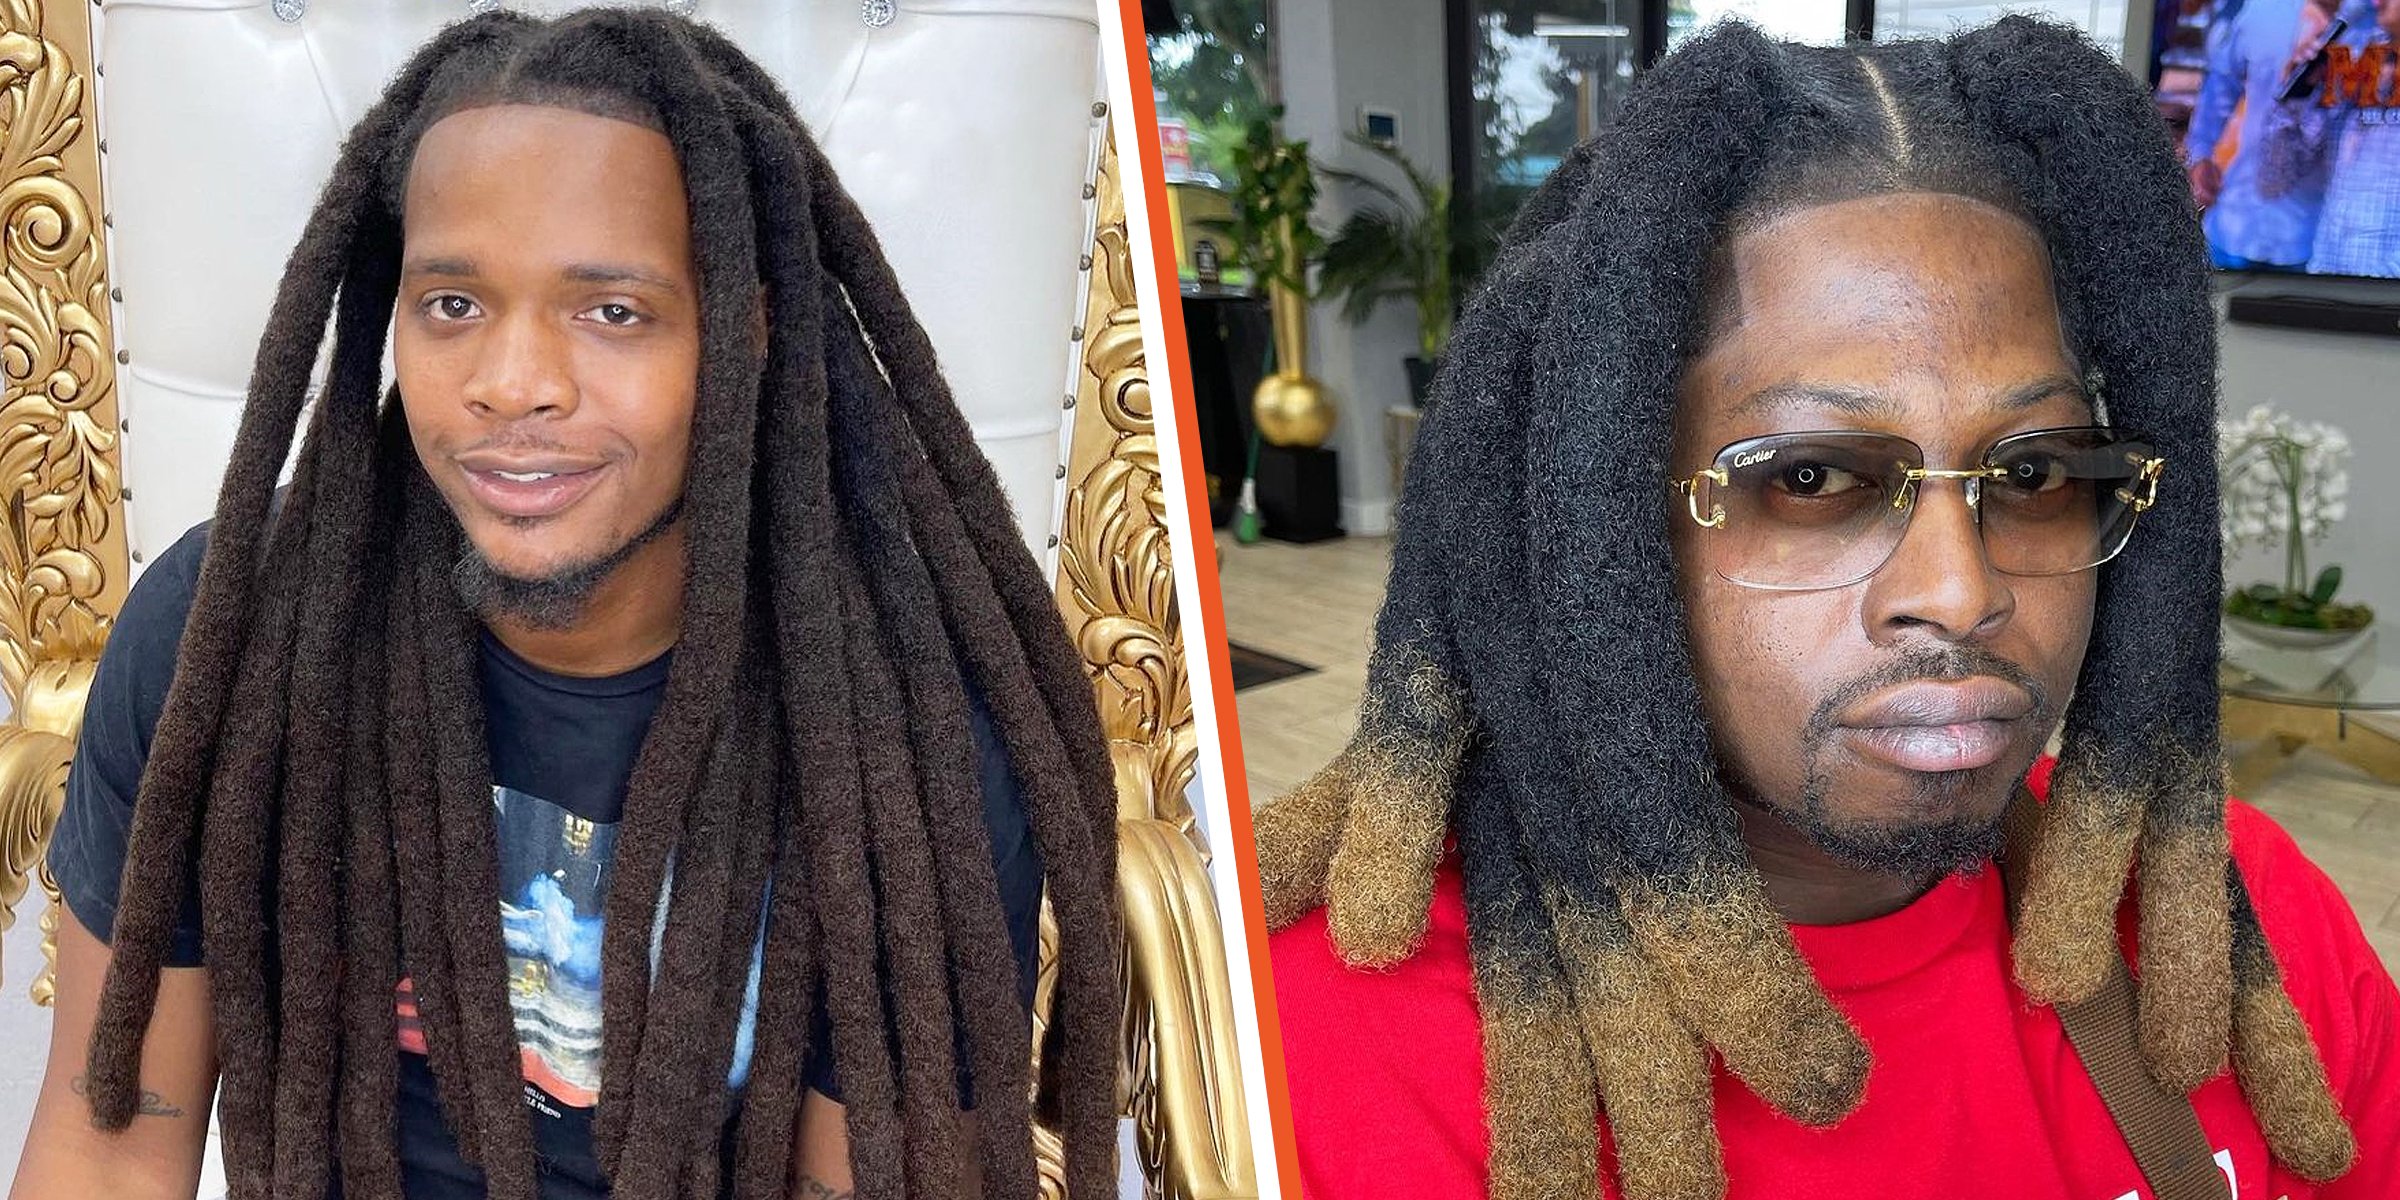 Wicks dreads hairstyle | Source: Getty Images